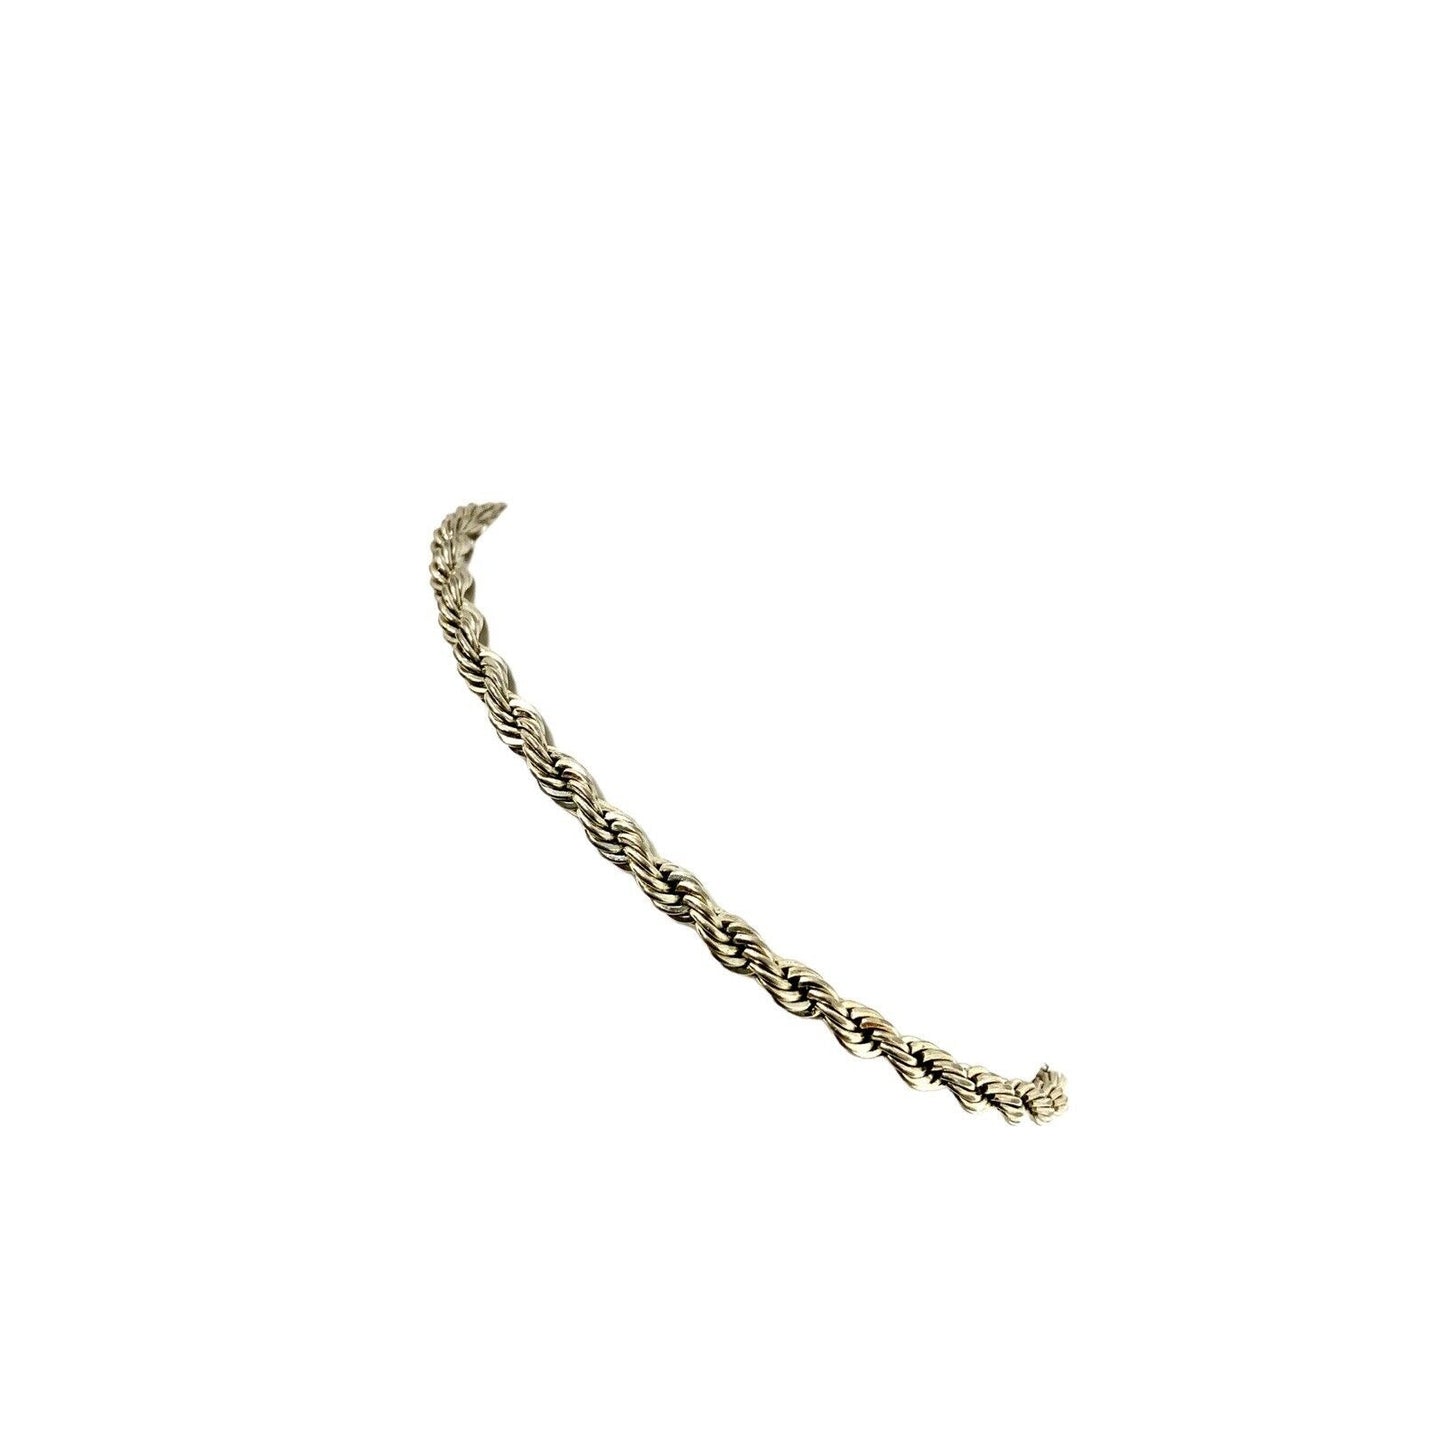 Silver-Tone Twisted Rope Chain Bracelet